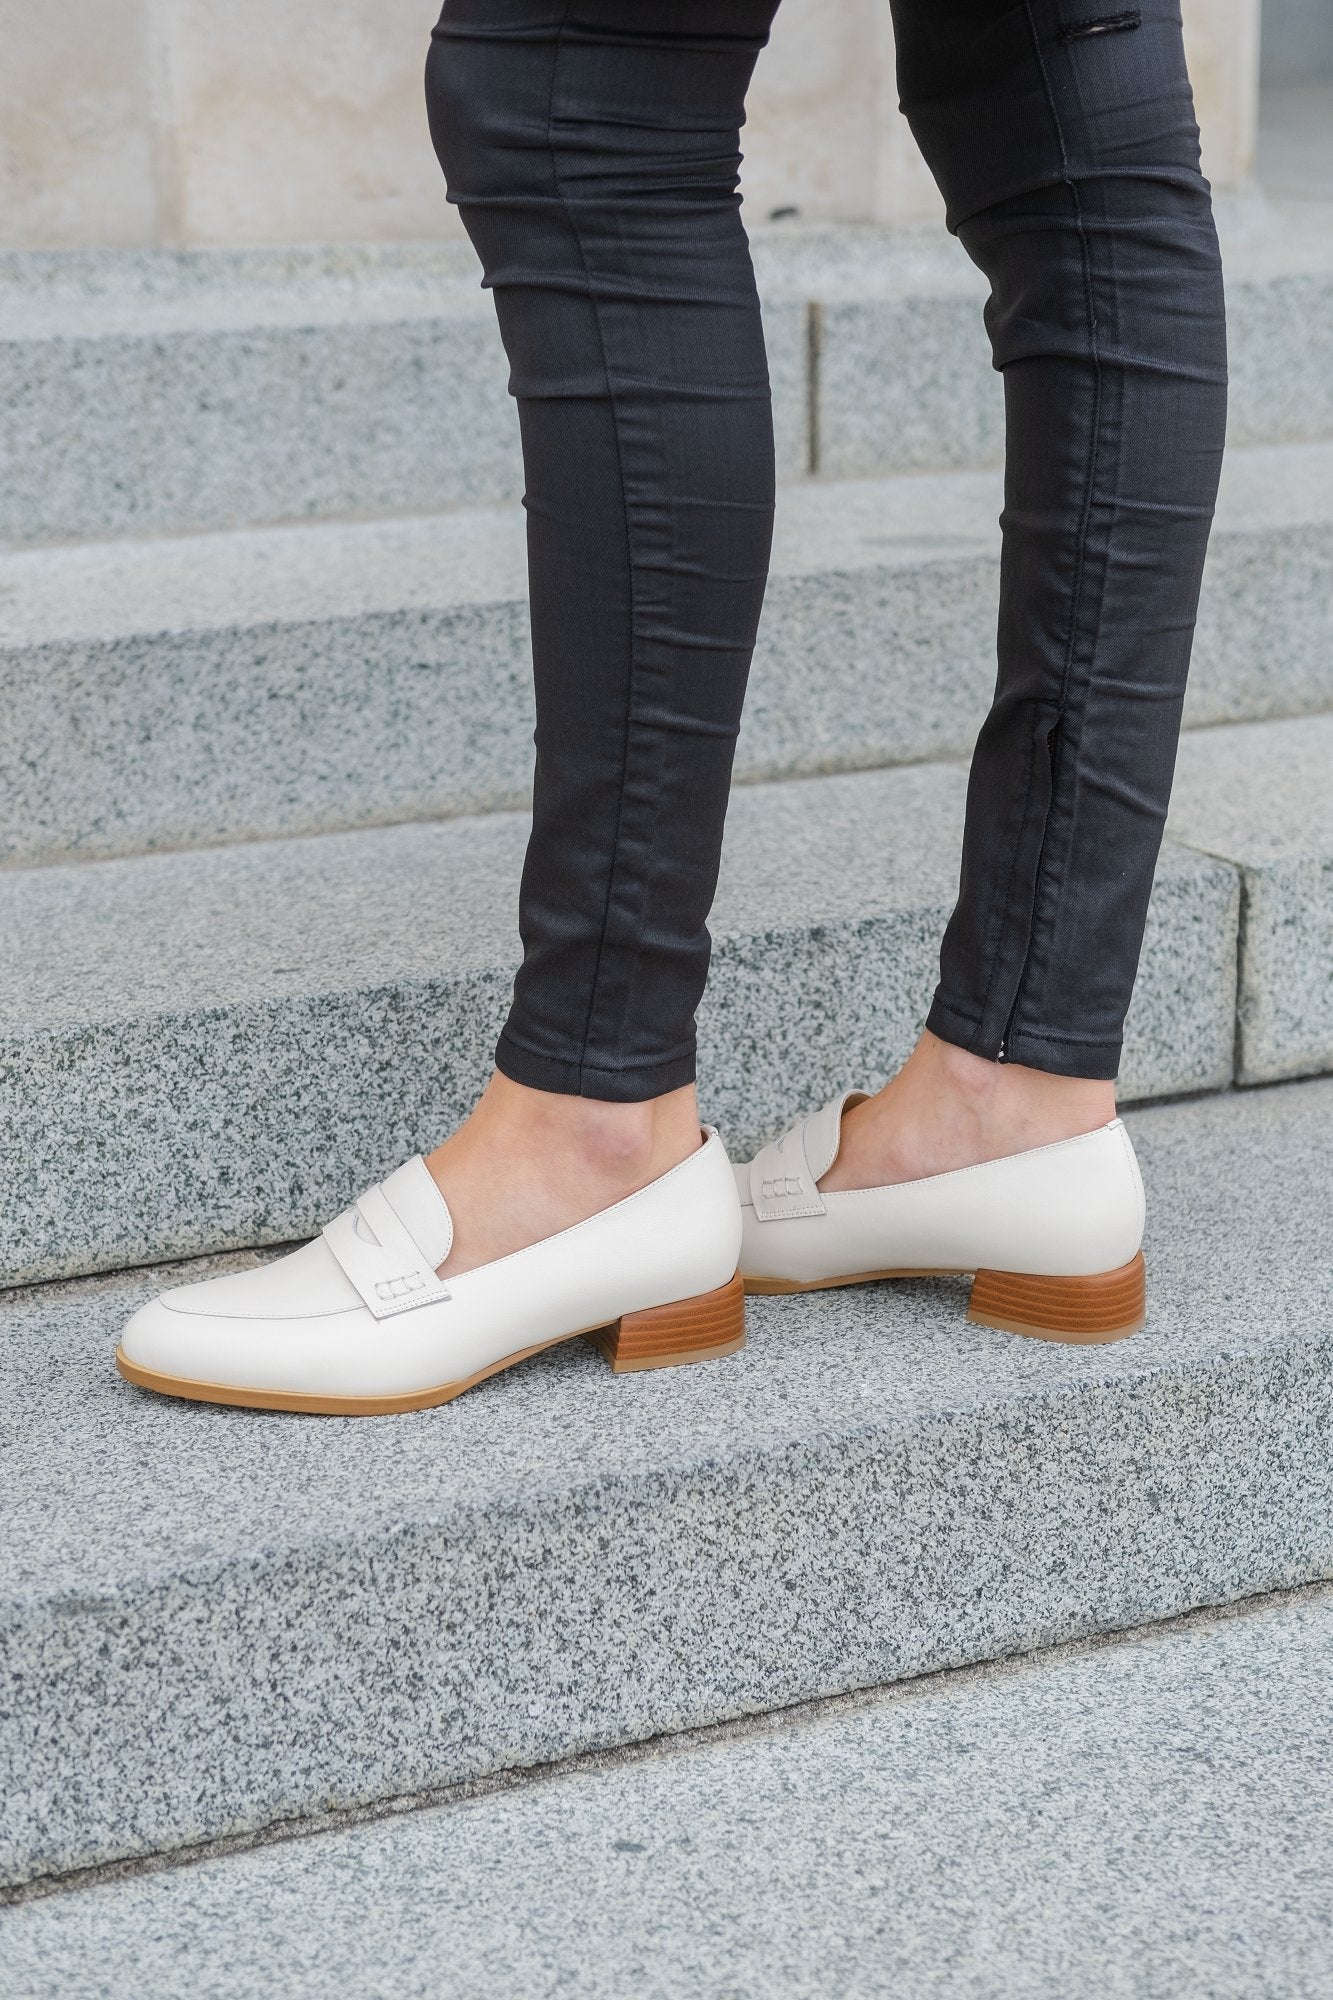 Marcel Leather Loafer Bone Flats by Sole Shoes NZ F24-36